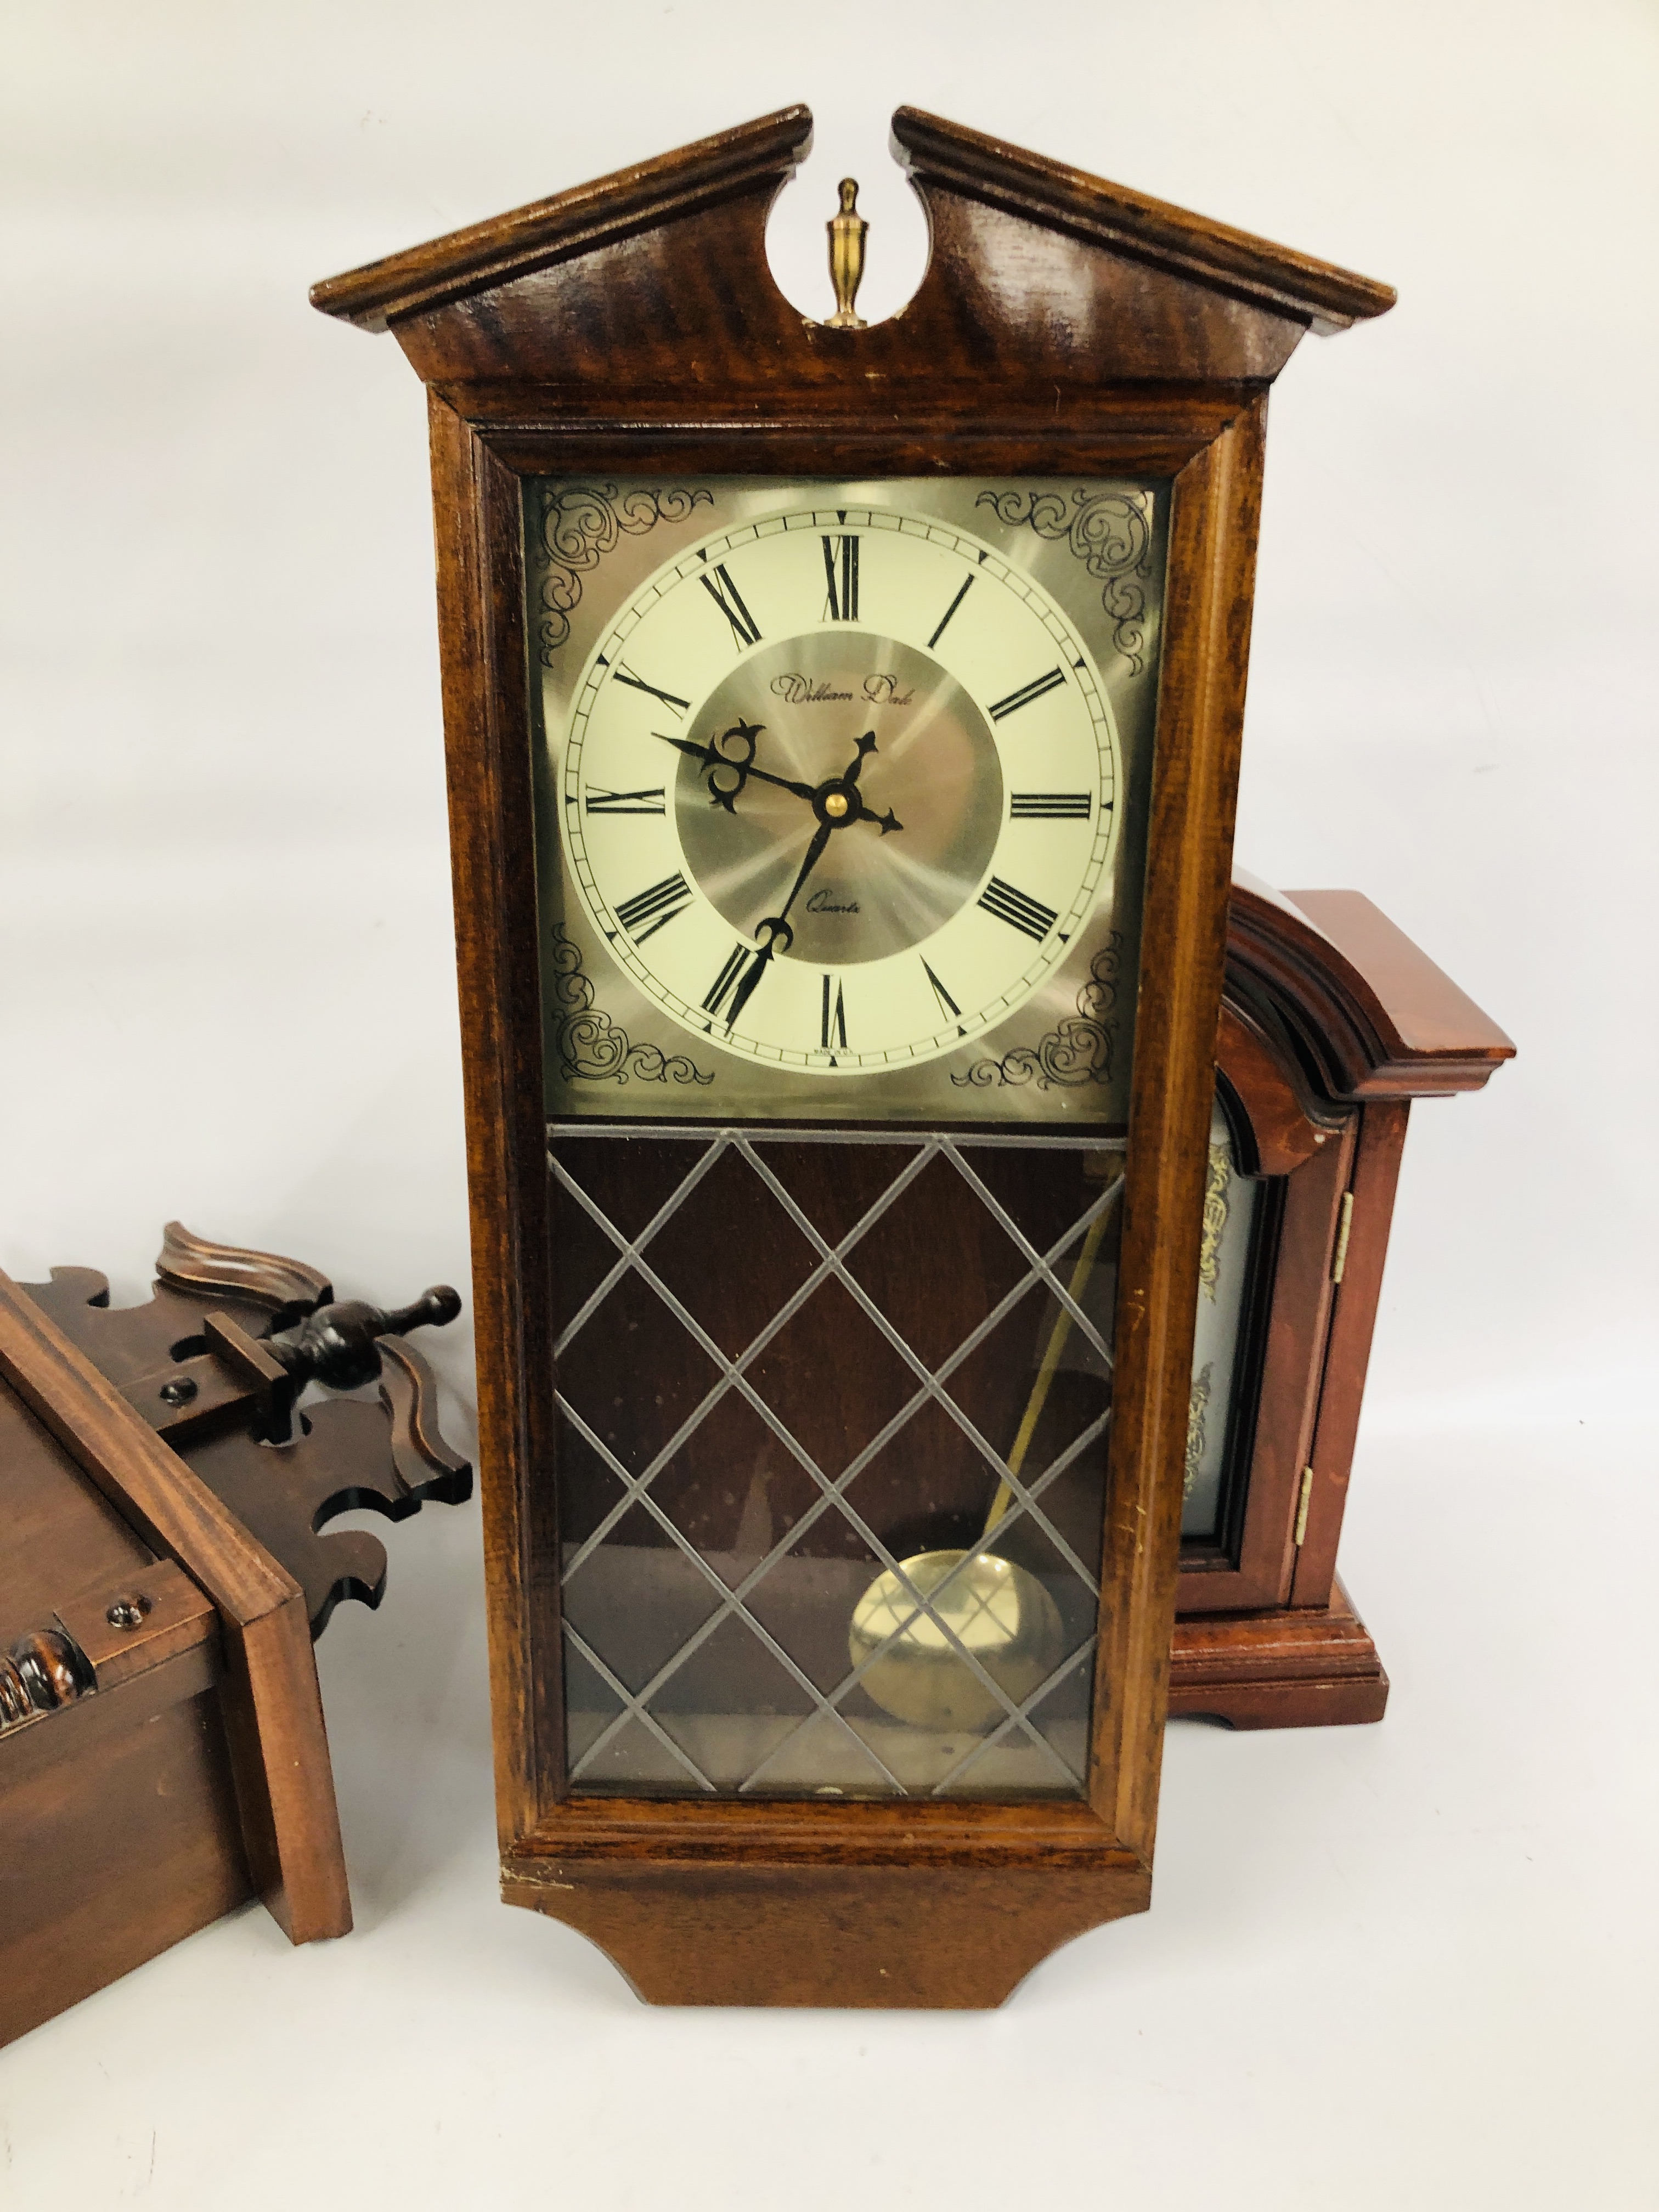 MODERN MAHOGANY FINISH MANTEL CLOCK ALONG WITH TWO WALL CLOCKS ONE MARKED LINCOLN THE OTHER WILLIAM - Image 2 of 6